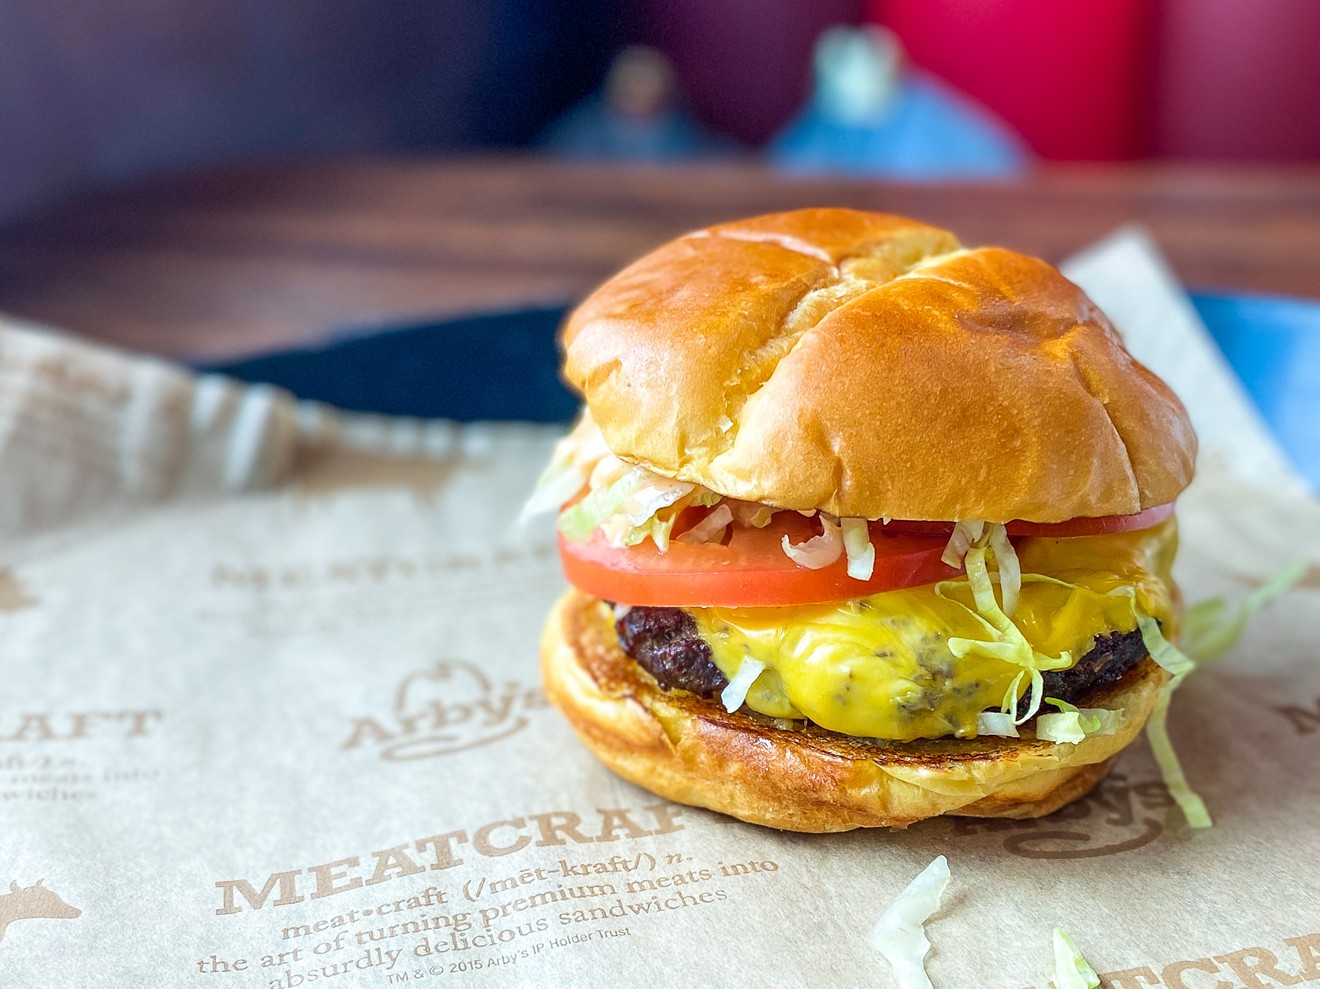 The Deluxe Wagyu Steakhouse Burger is Arby's foray into the burger world